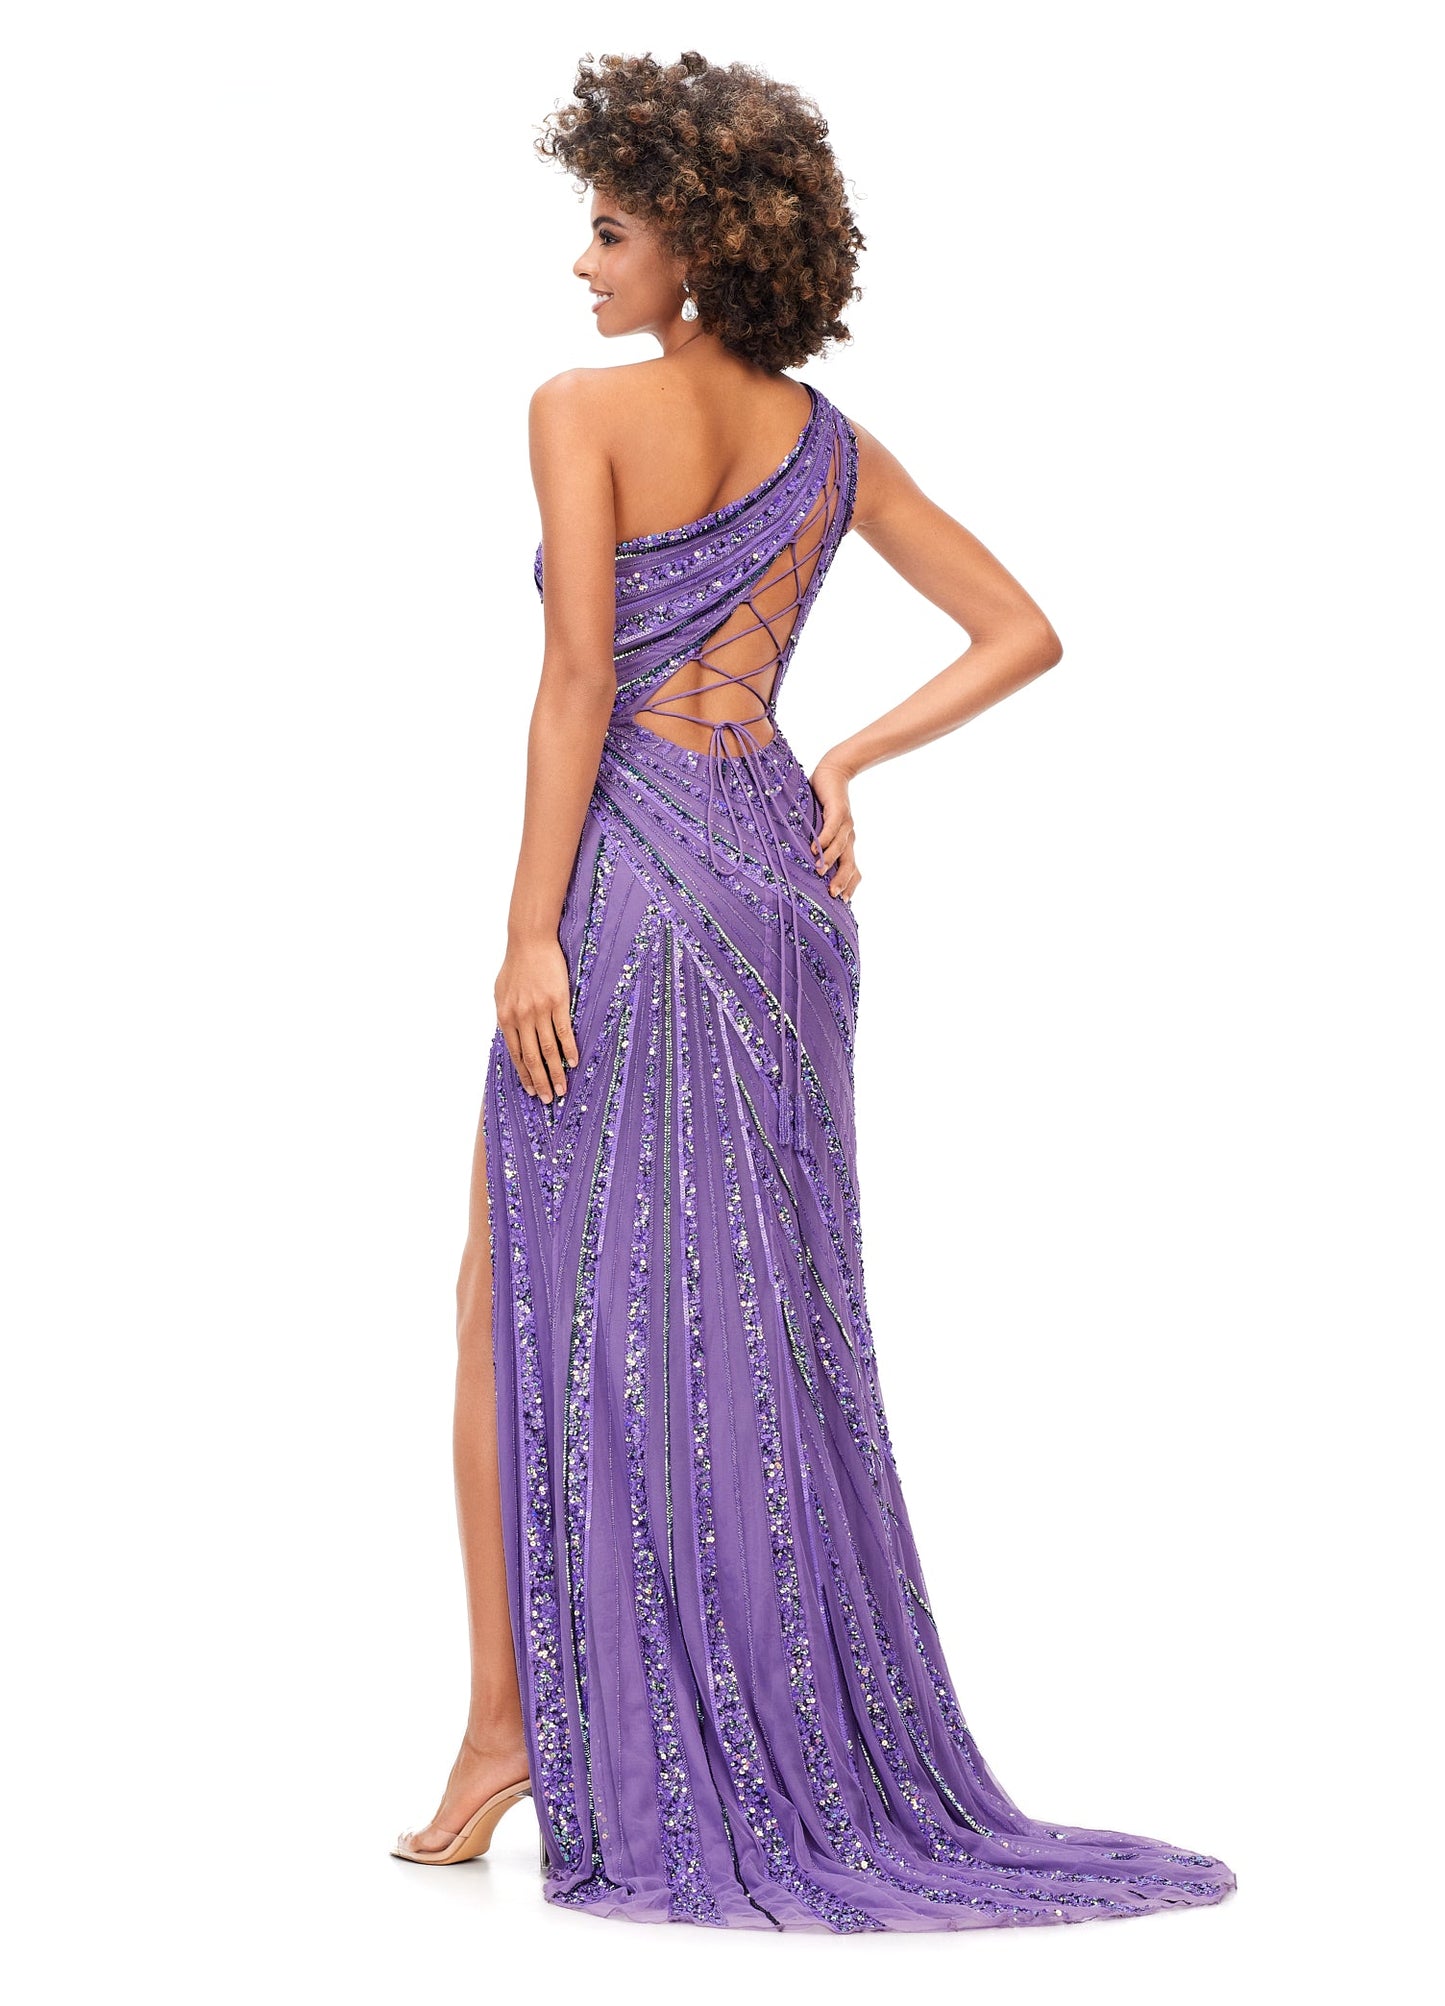 Ashley Lauren 11244 Long Sequin One Shoulder Prom Dress Formal Slit Gown Corset  This one shoulder gown features an intricate bead pattern that will accentuate your curves. The look is complete with a left leg slit and our signature asymmetrical lace up back. One Shoulder Lace Up Back Left Leg Slit Fully Hand Beaded Sizes: 00-18 Colors:  Purple, Neon Blue, AB/Ivory, Royal/Turquoise, Electric Coral, Jade, Neon Pink, Orchid